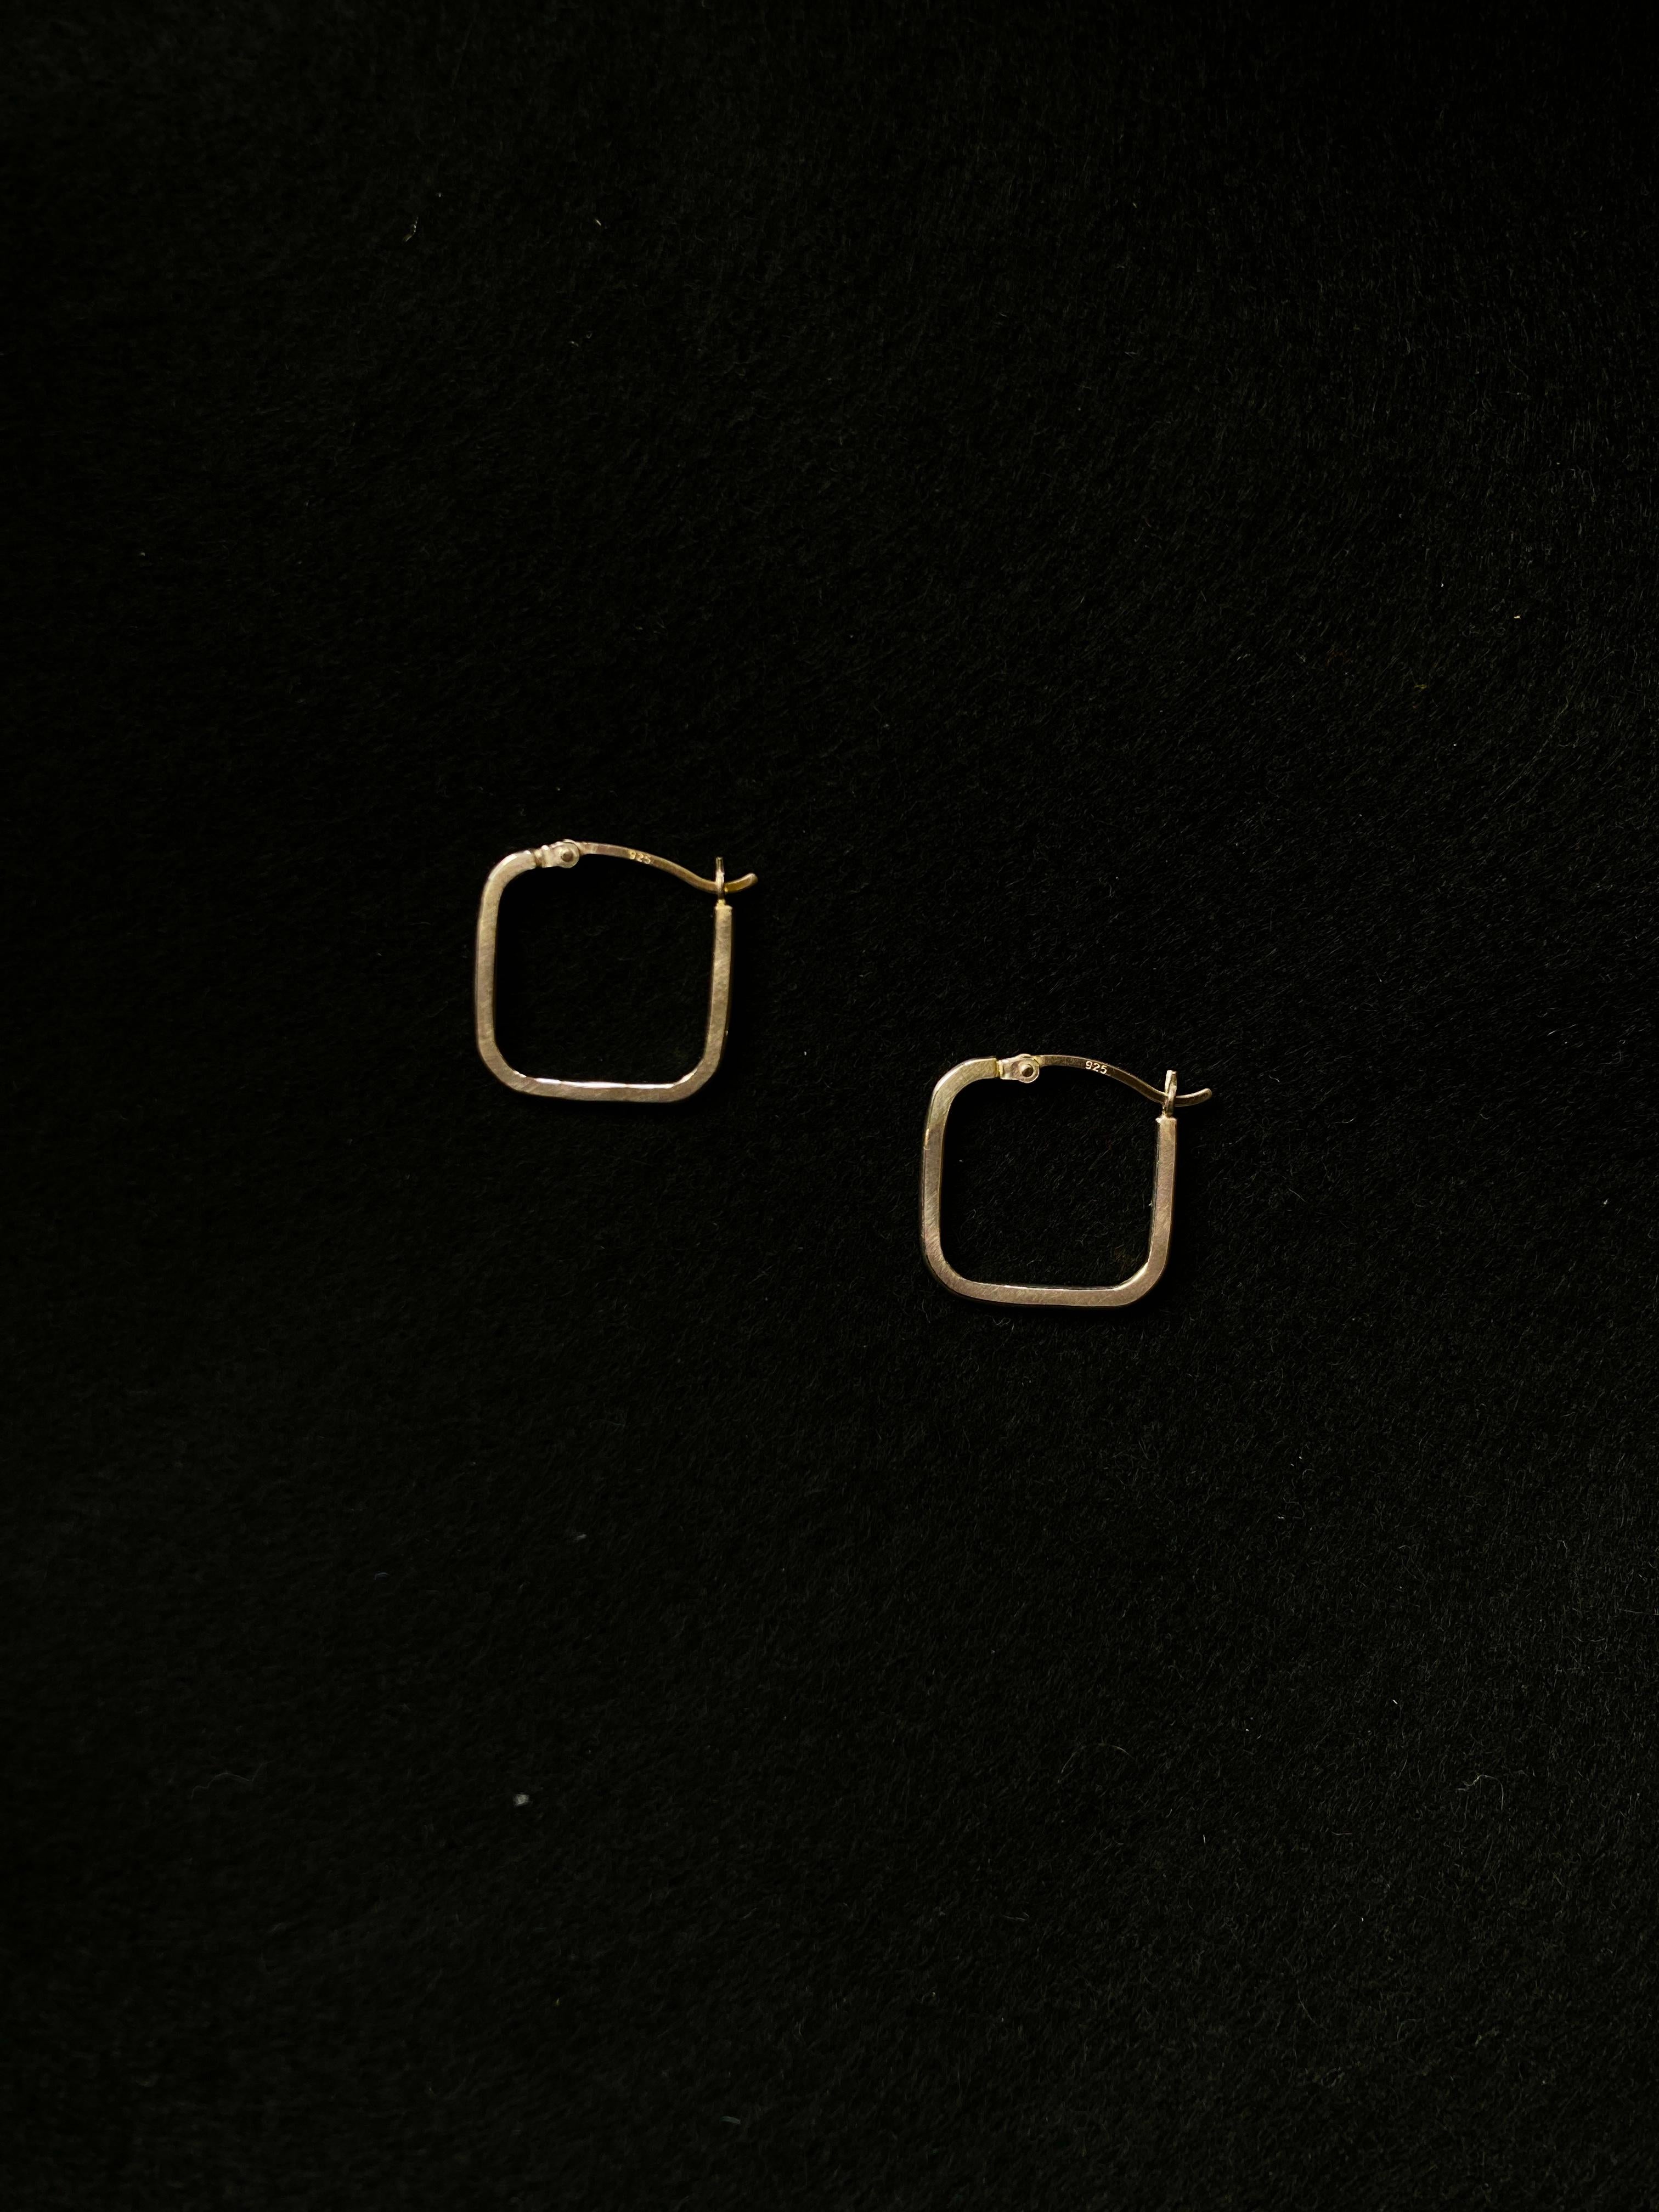 These lightweight earrings are a perfect alternative to standard pair of everyday hoops.
They are made in 18ct Gold vermeil silver, and are finished with a matte sheen with burnished edges to catch the light when worn. 

They come with a creole